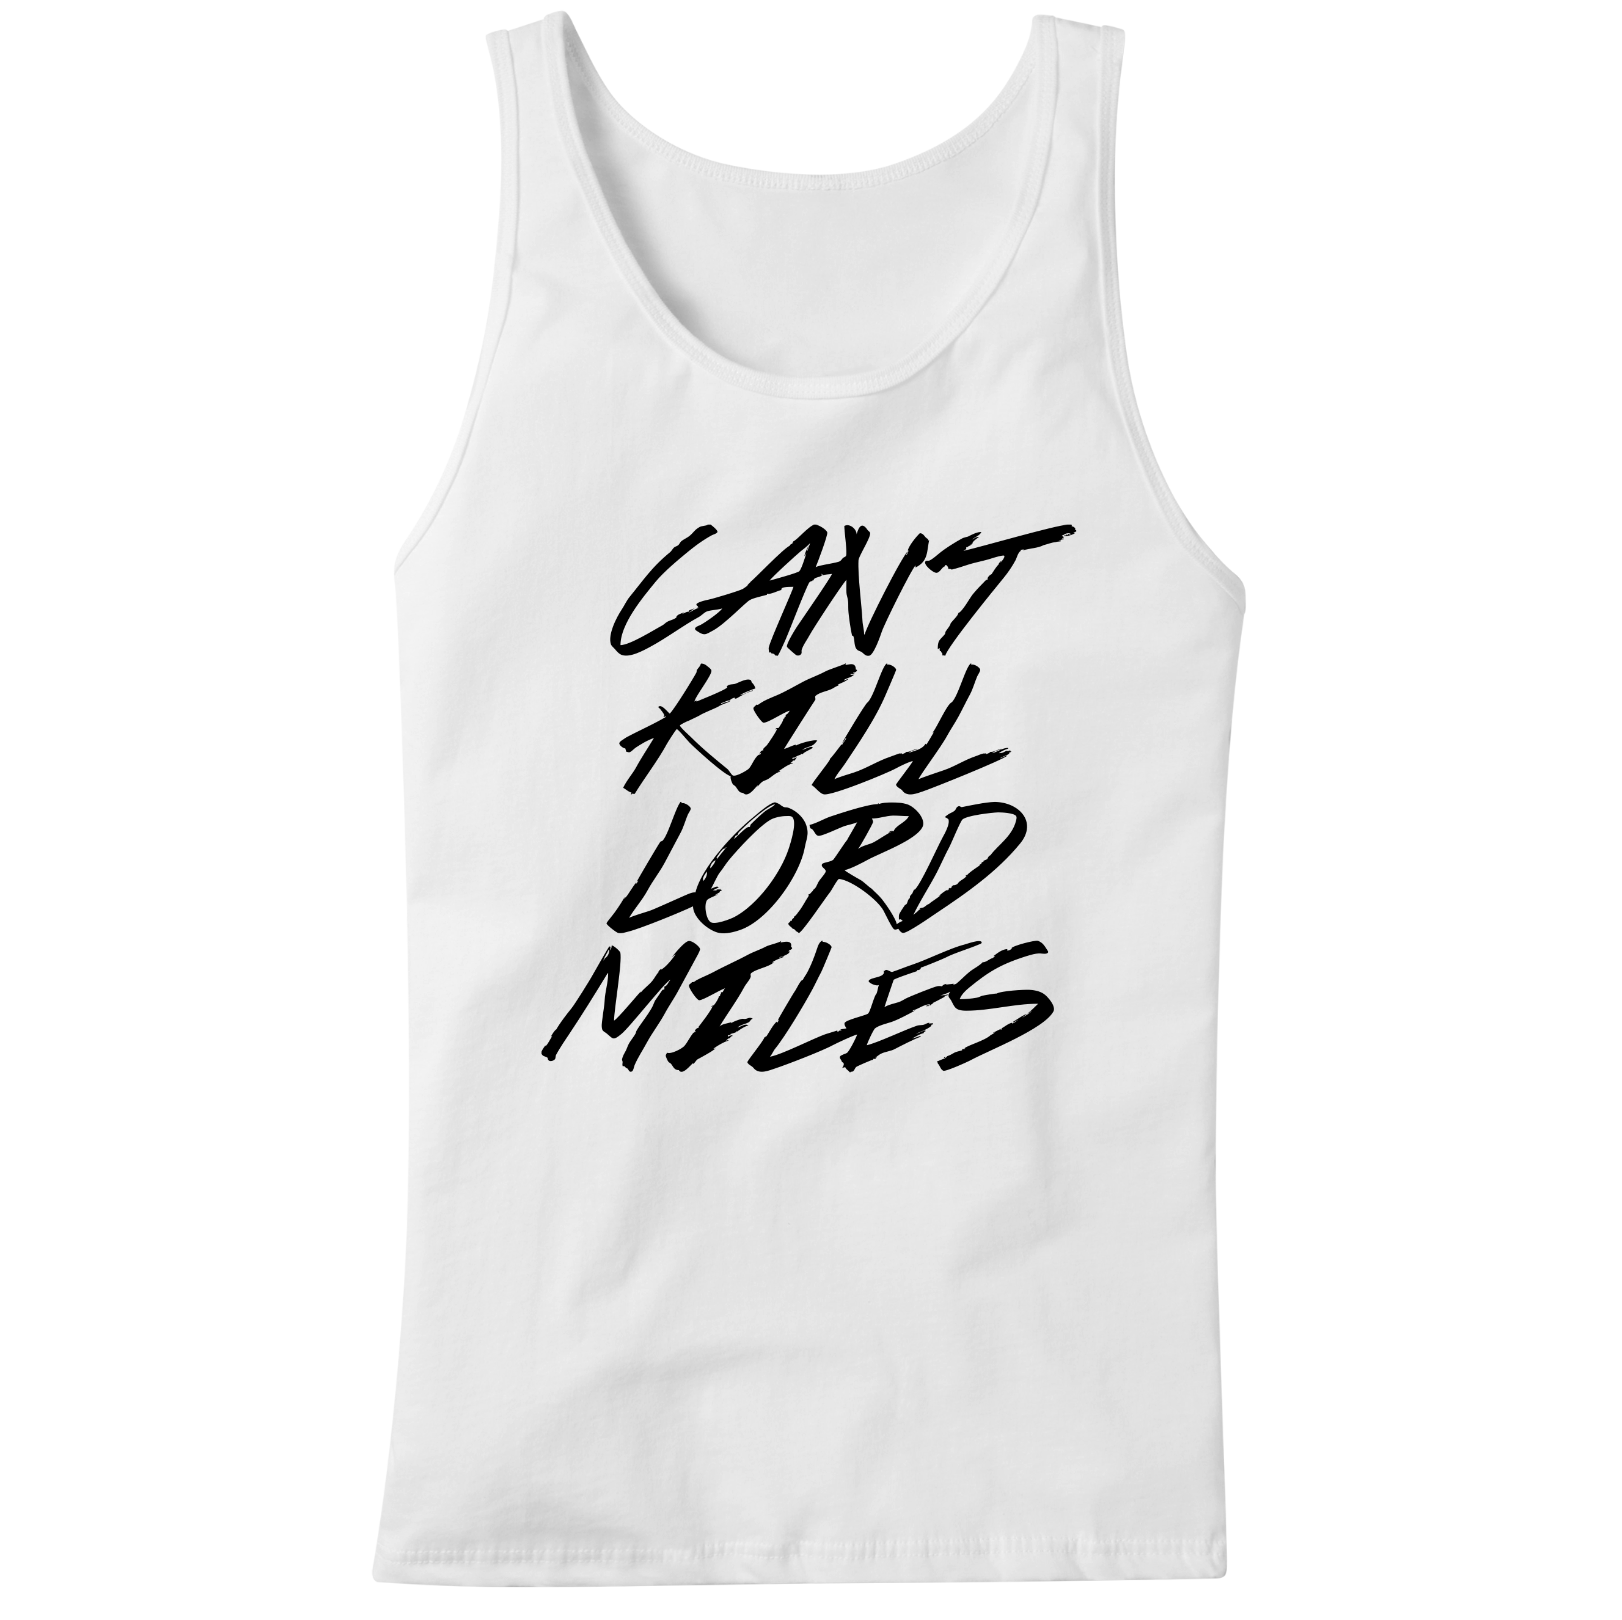 Cant Kill Lord Miles (White) Tanktop-1